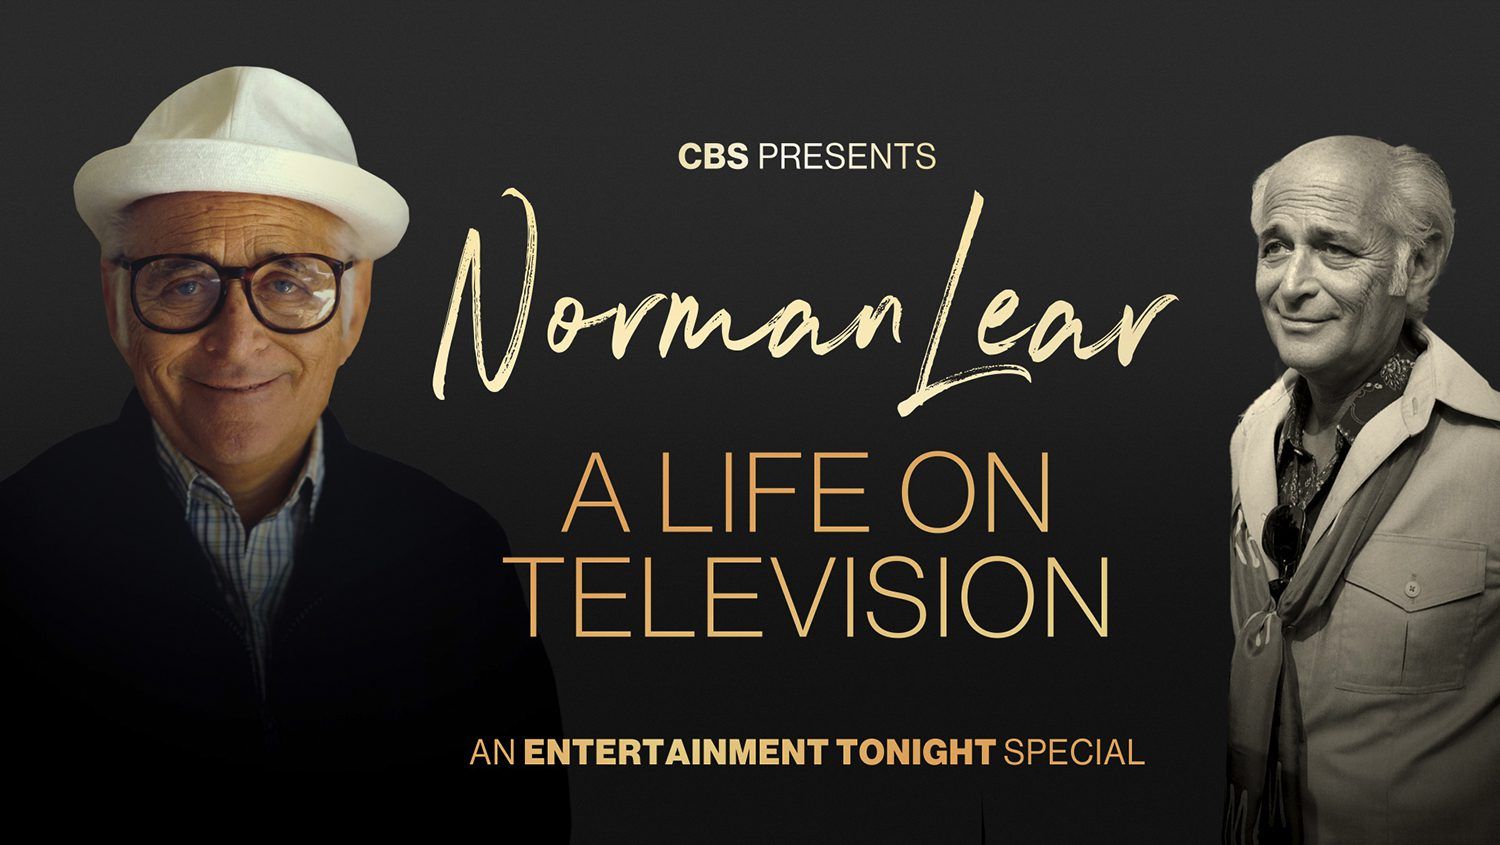 Norman Lear, Norman Lear: A Life on Television, Entertainment Tonight, An Entertainment Tonight Special, All in the Family, Sanford and Son, Maude, Good Times, One Day at a Time, The Jeffersons